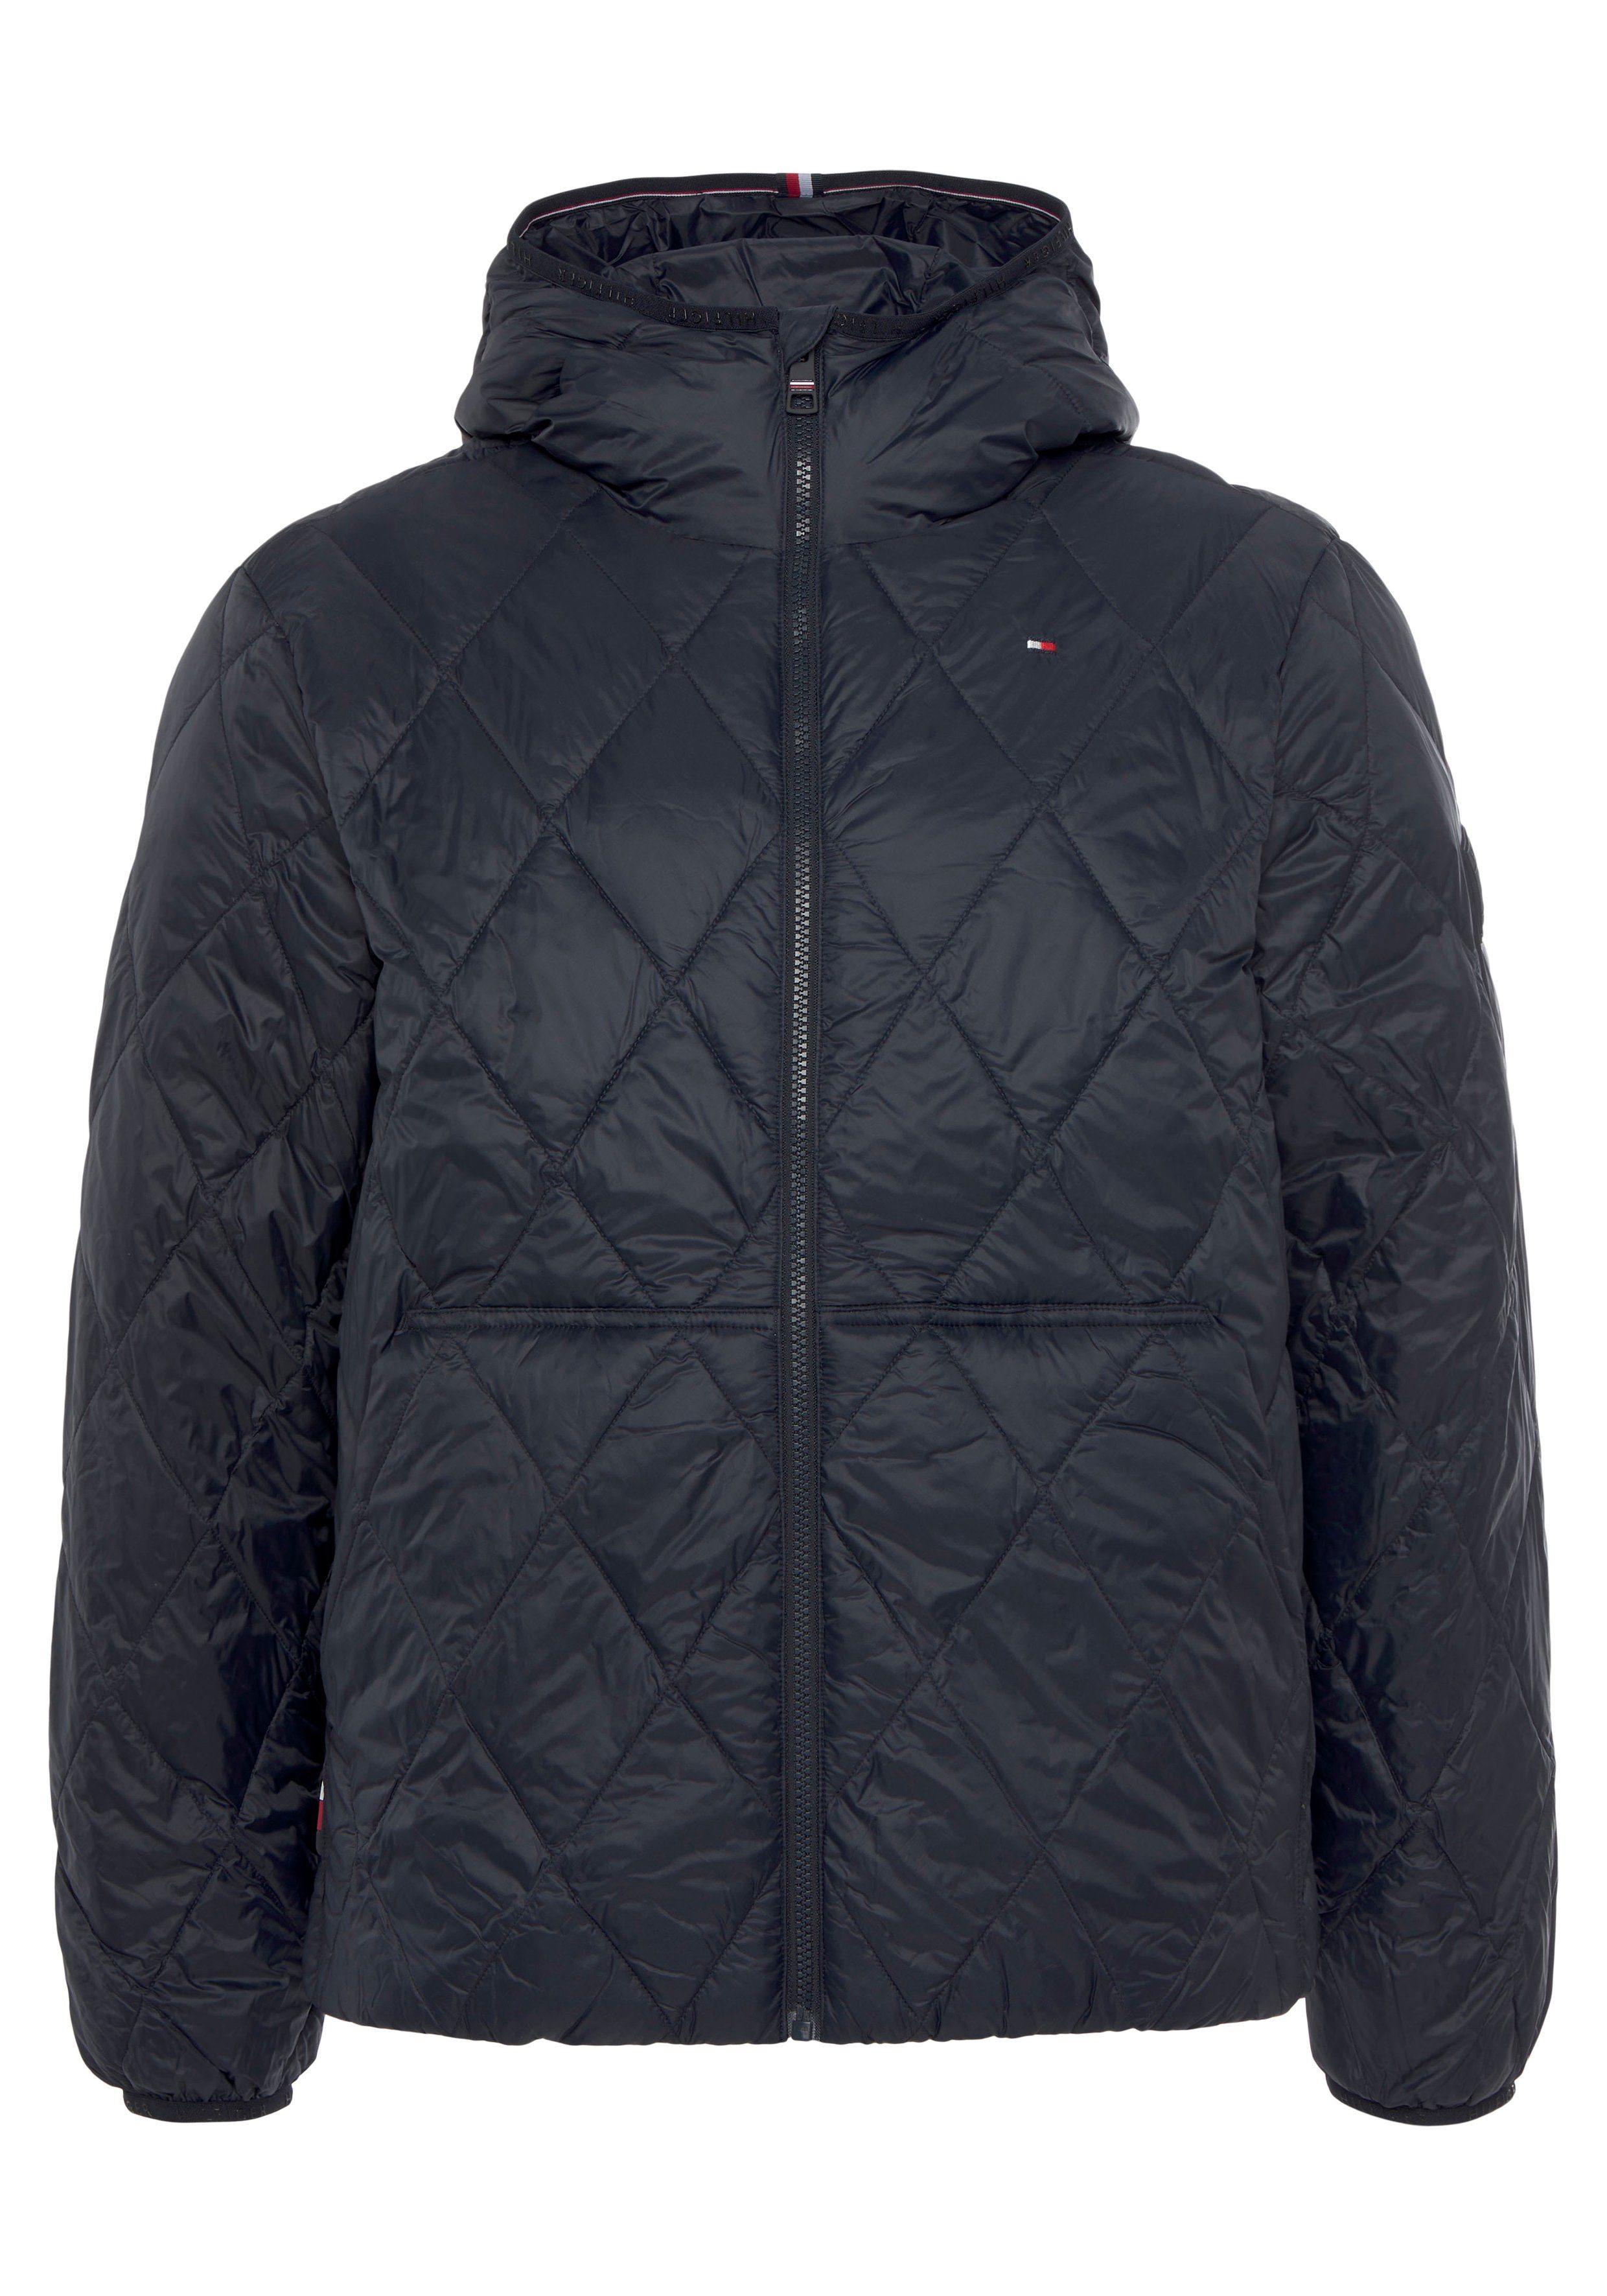 HOODED CL QUILTED Steppjacke Tommy Hilfiger JACKET